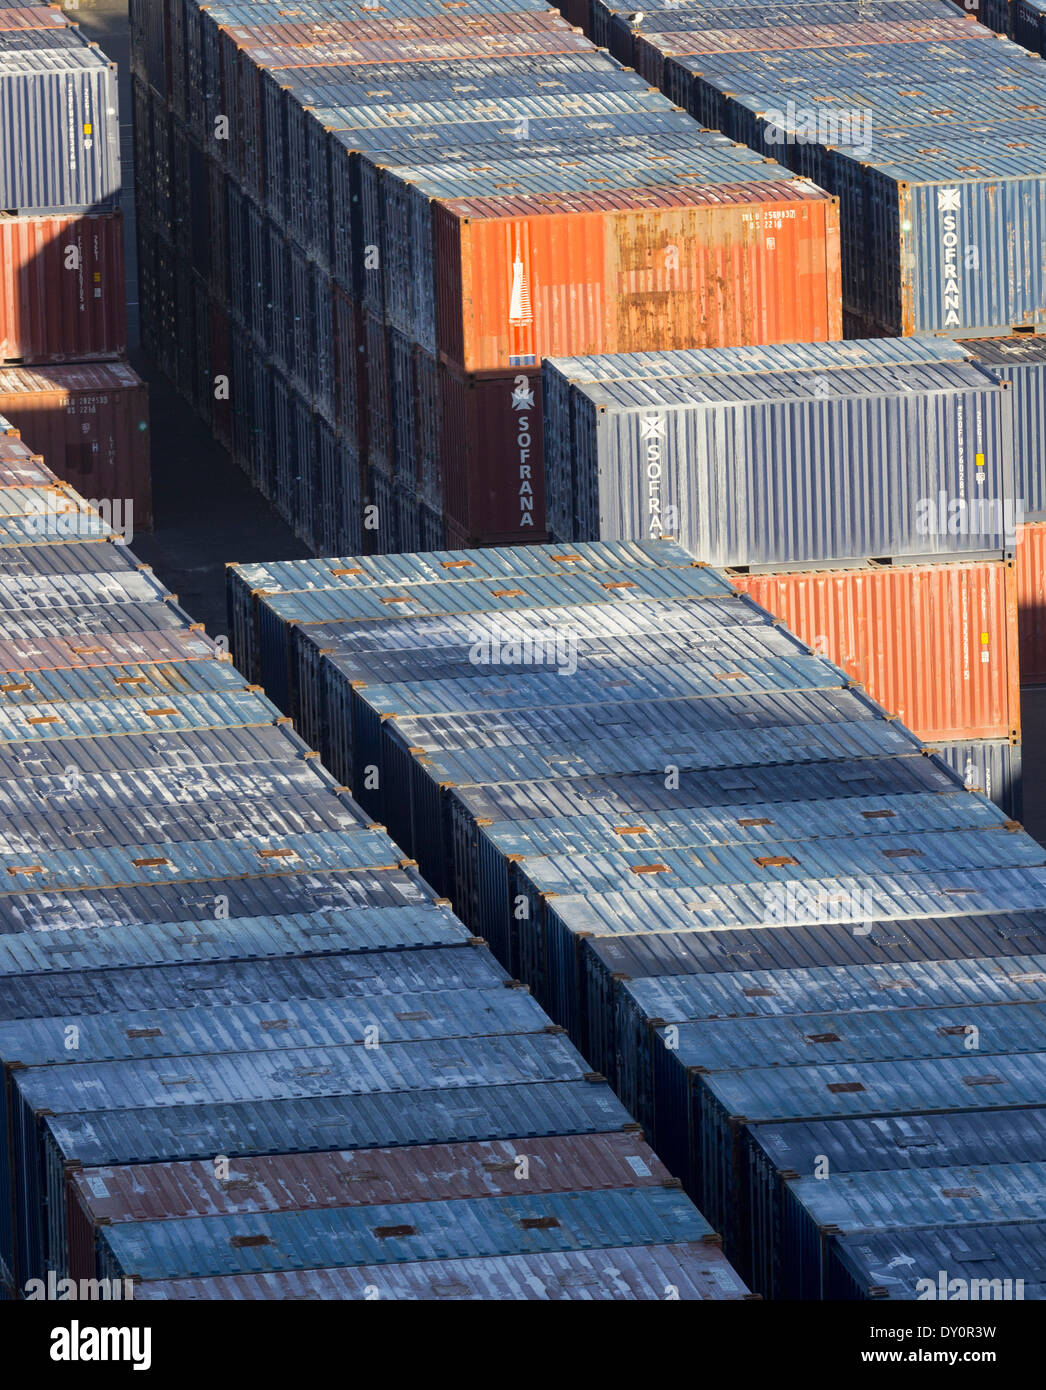 Stacks of industrial shipping containers at a port Stock Photo